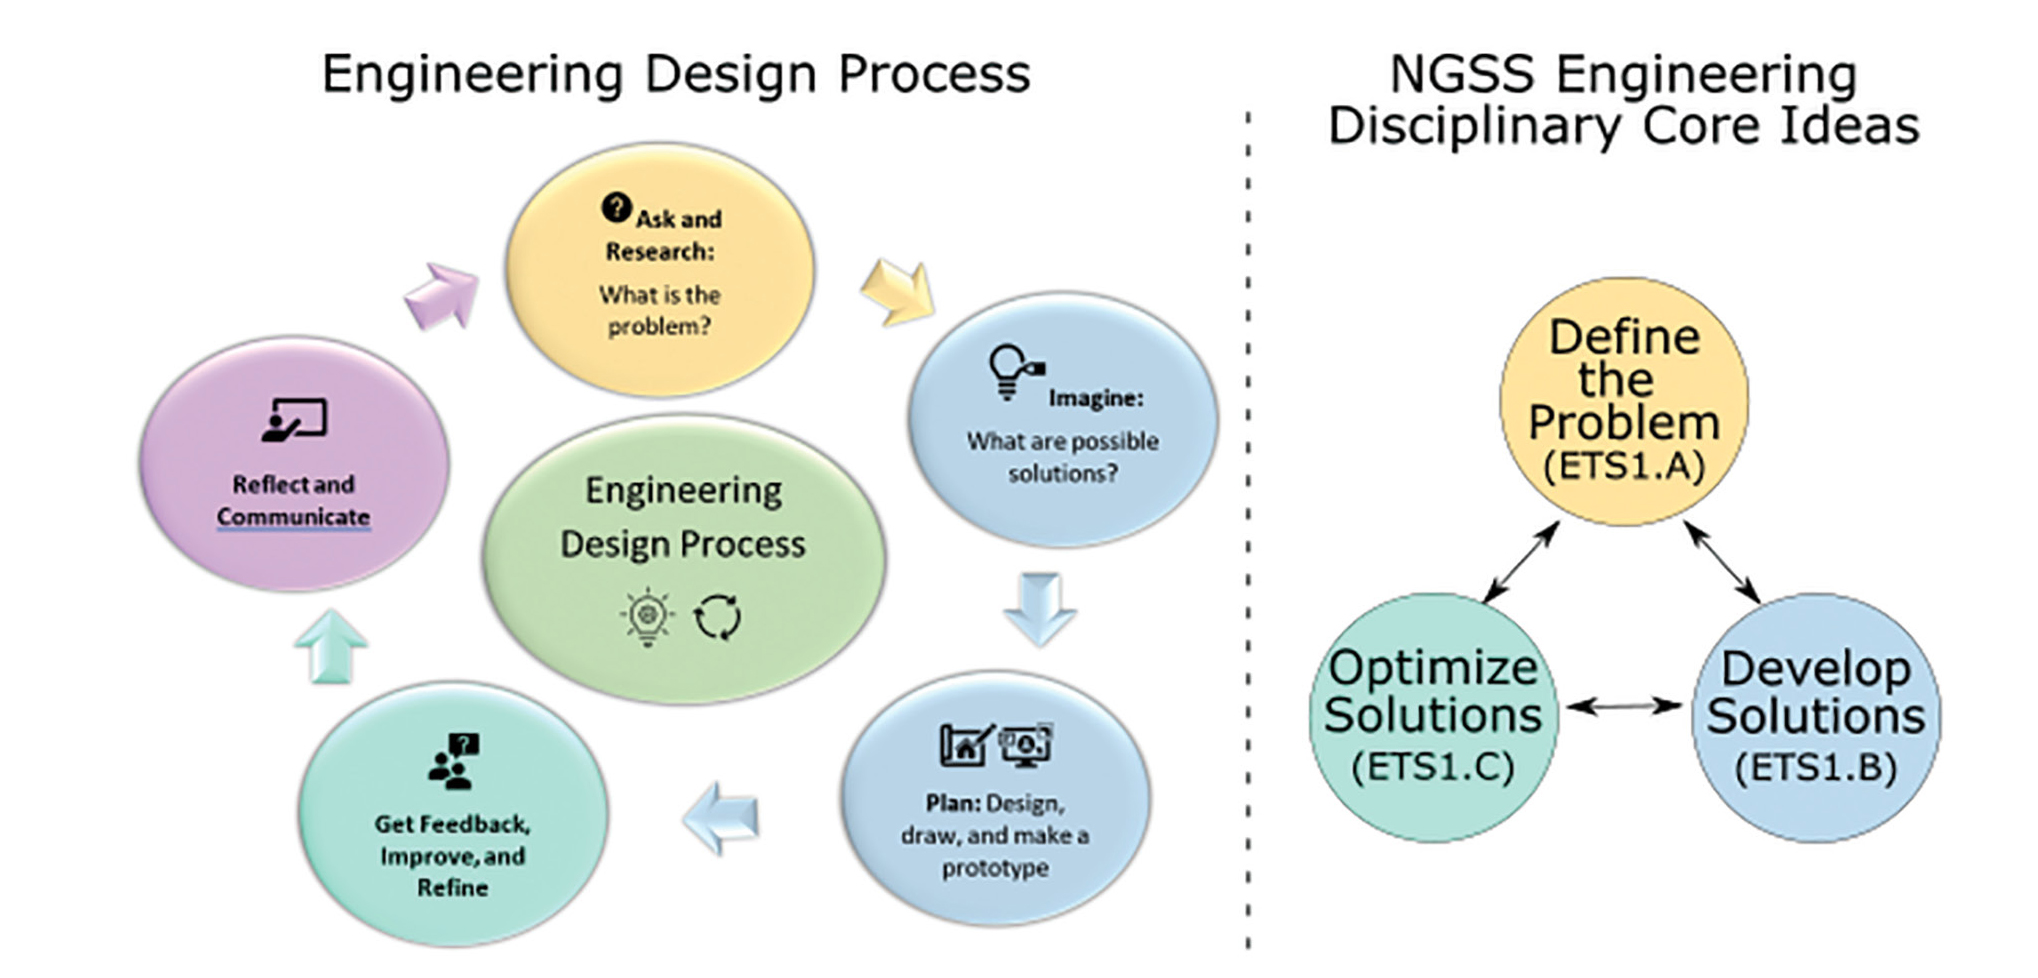 Figure 1 The engineering design process and its relationship to engineering disciplinary core ideas.